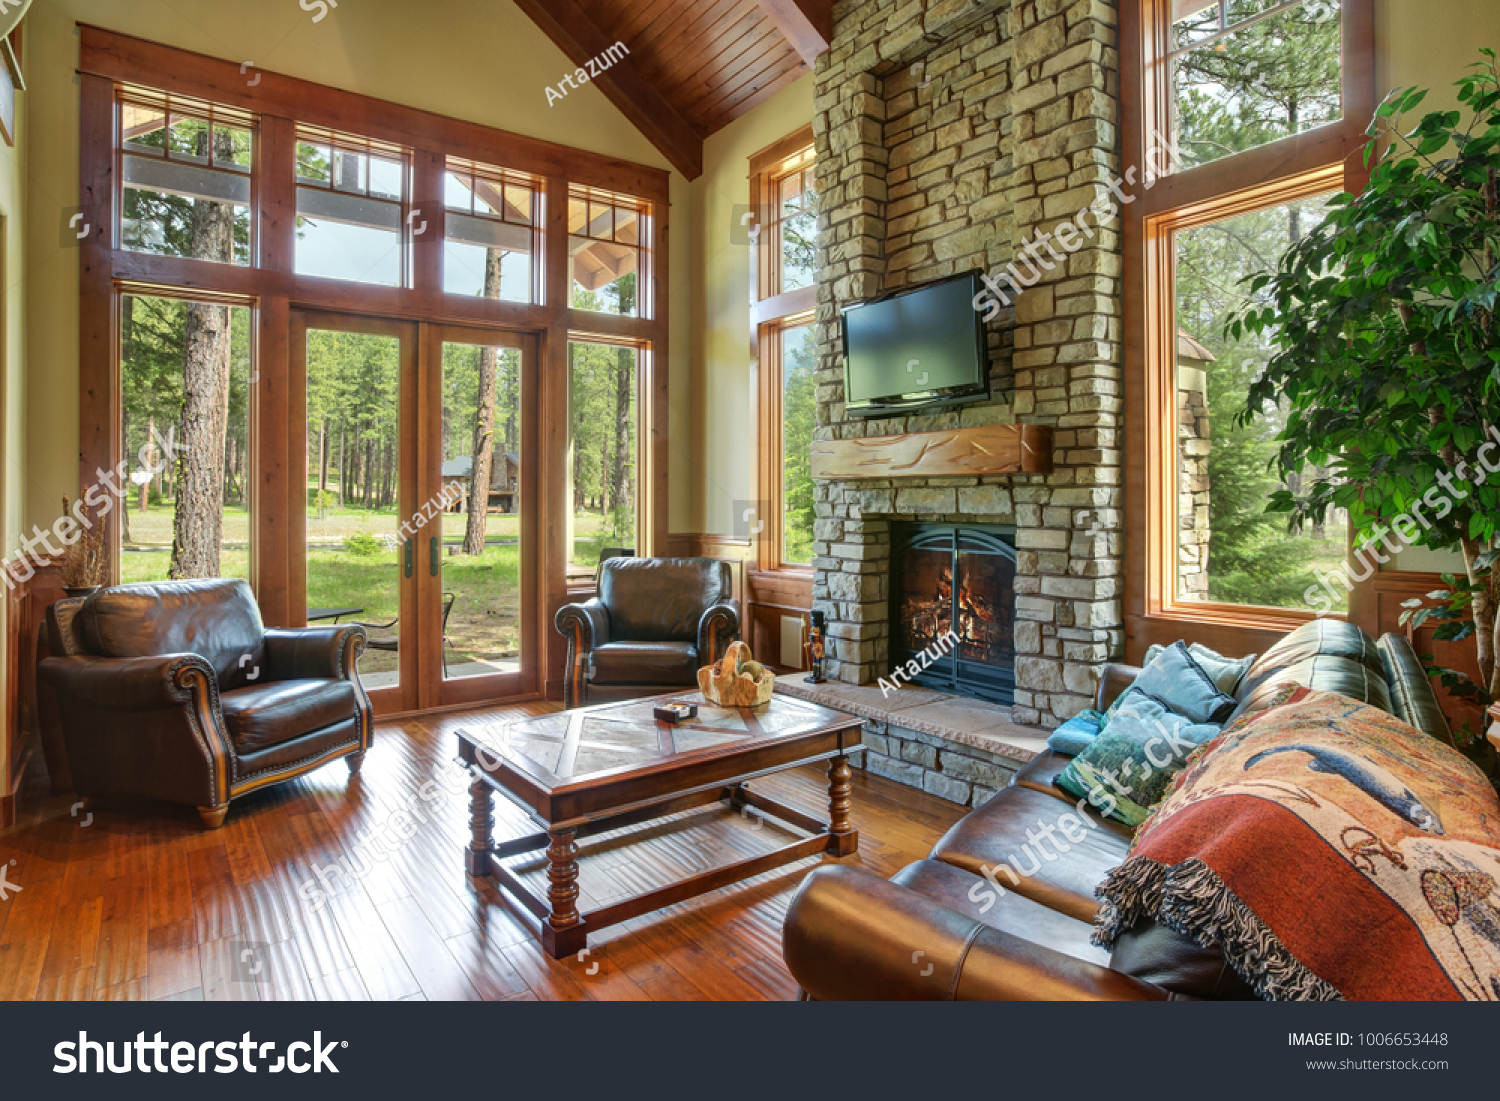 Stunning Living Room Design Includes Stone Stock Photo Edit Now 1006653448